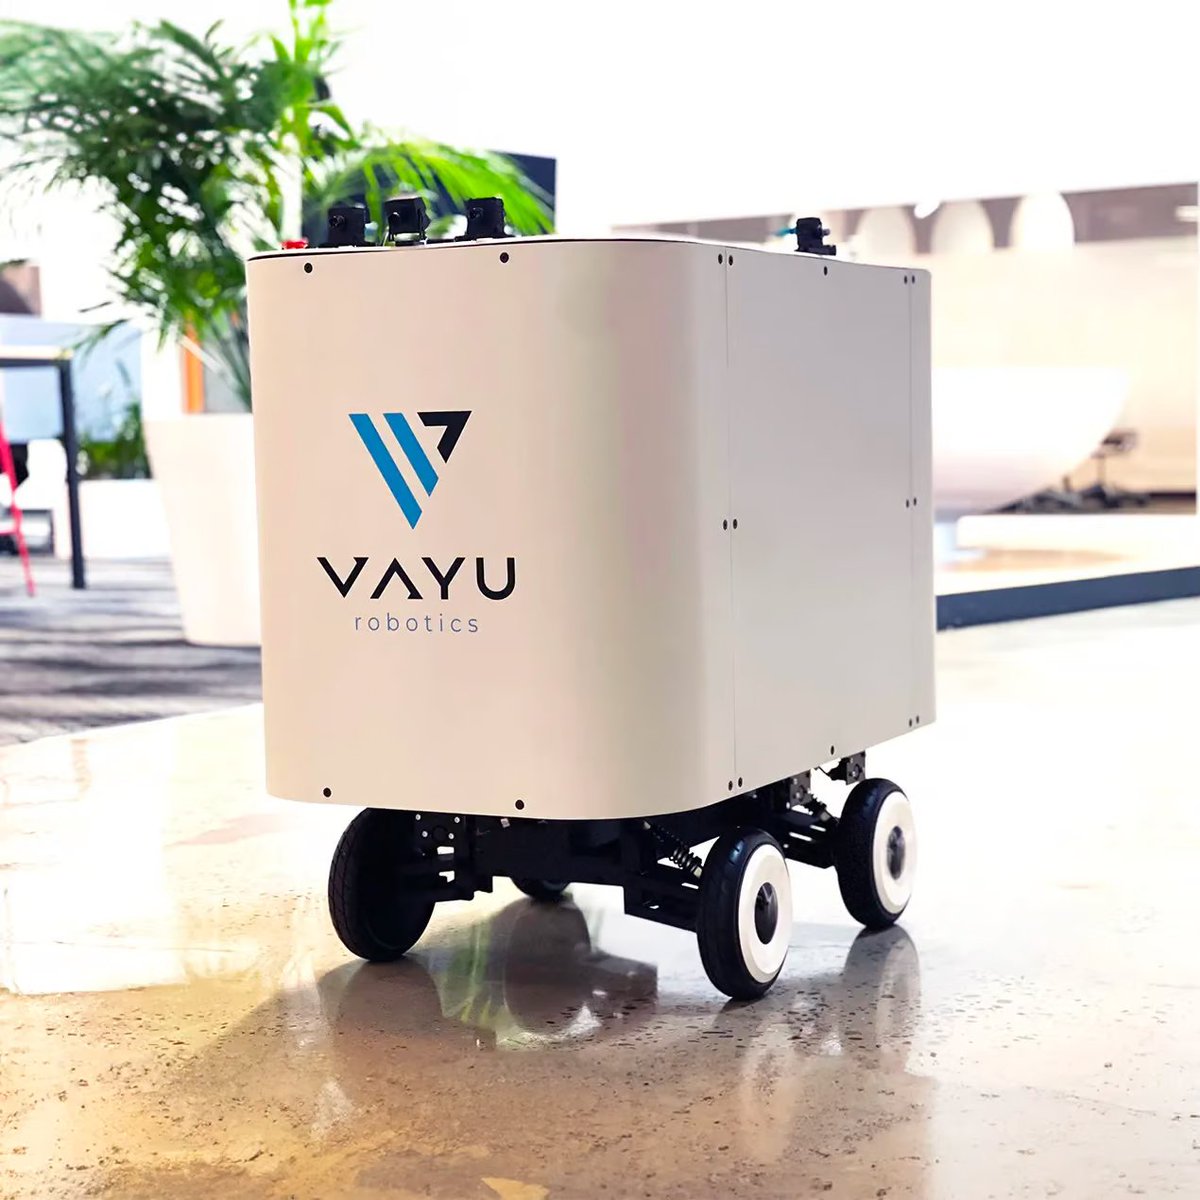 🚨 @VayuRobotics 
 
Amount: $12.7M 🎉

Round: Seed

Investor: Khosla Ventures

Quick Intro 👉 Building the foundation model for robotics – the next gen of AI to power perception and motion. They envision intelligent systems will advance safe and sustainable human productivity.